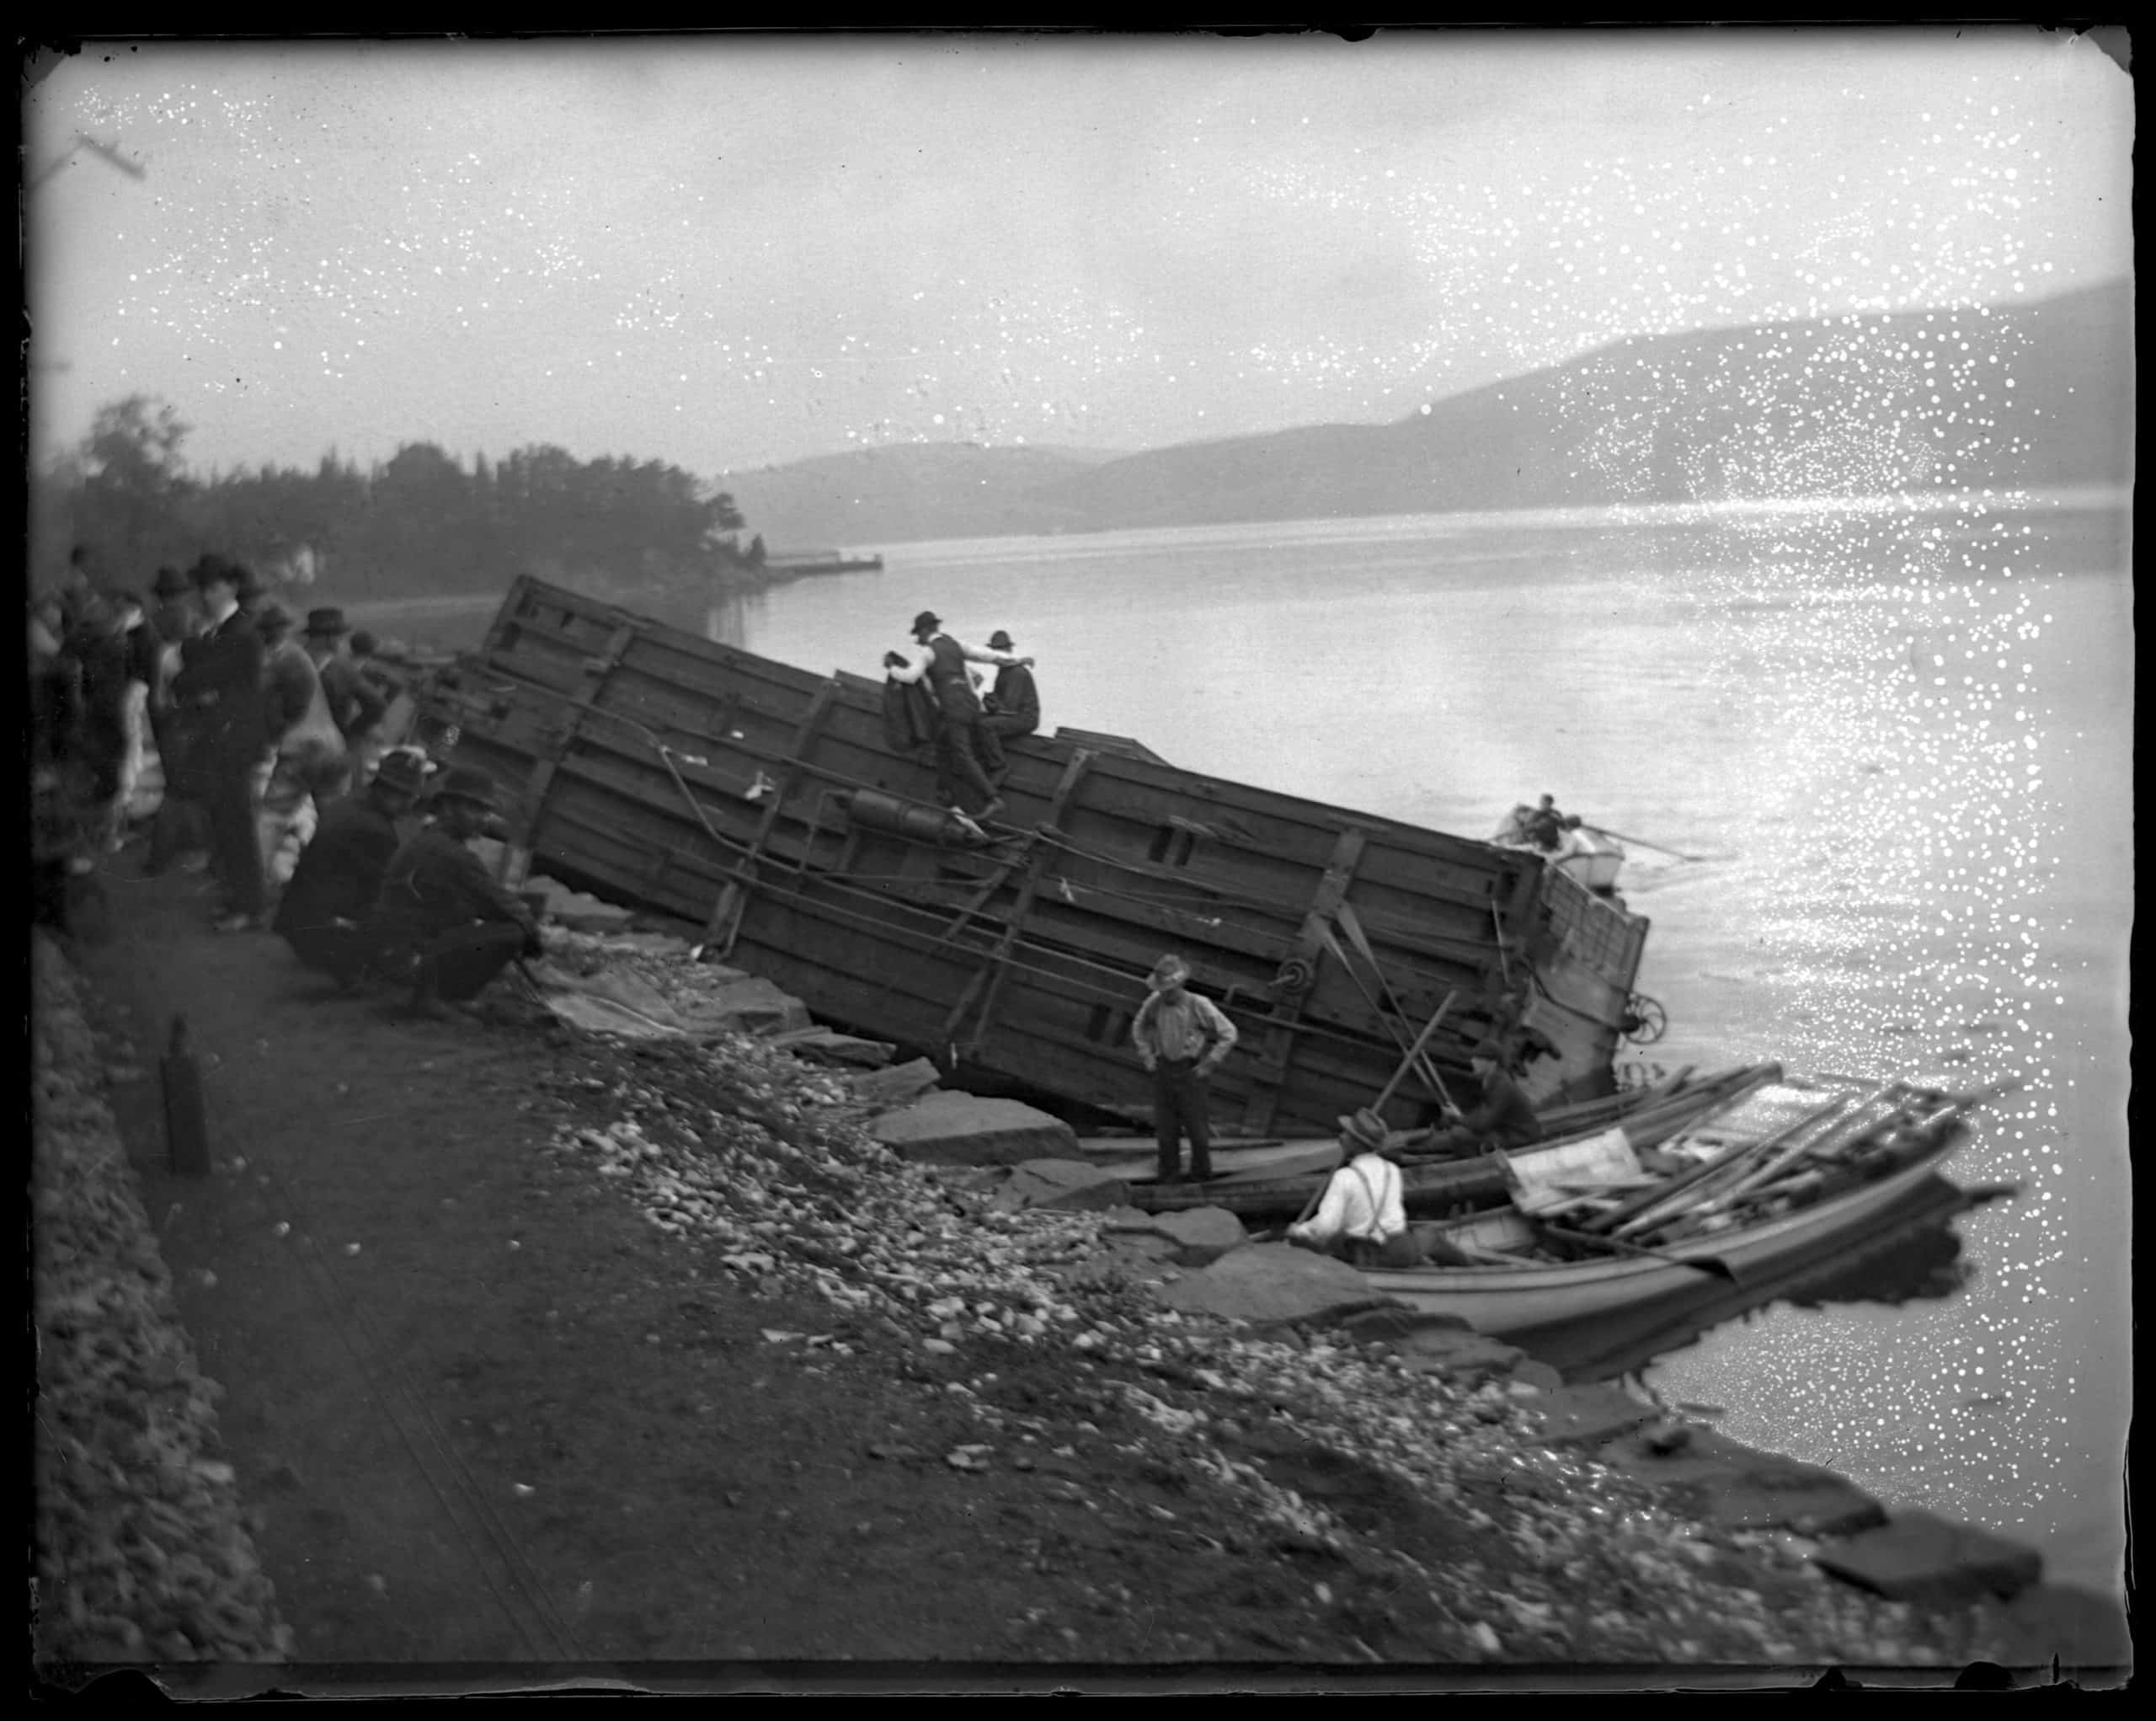 Derailed train car in the river Bronx N.Y. June 14 1902 - New-York Historical Society